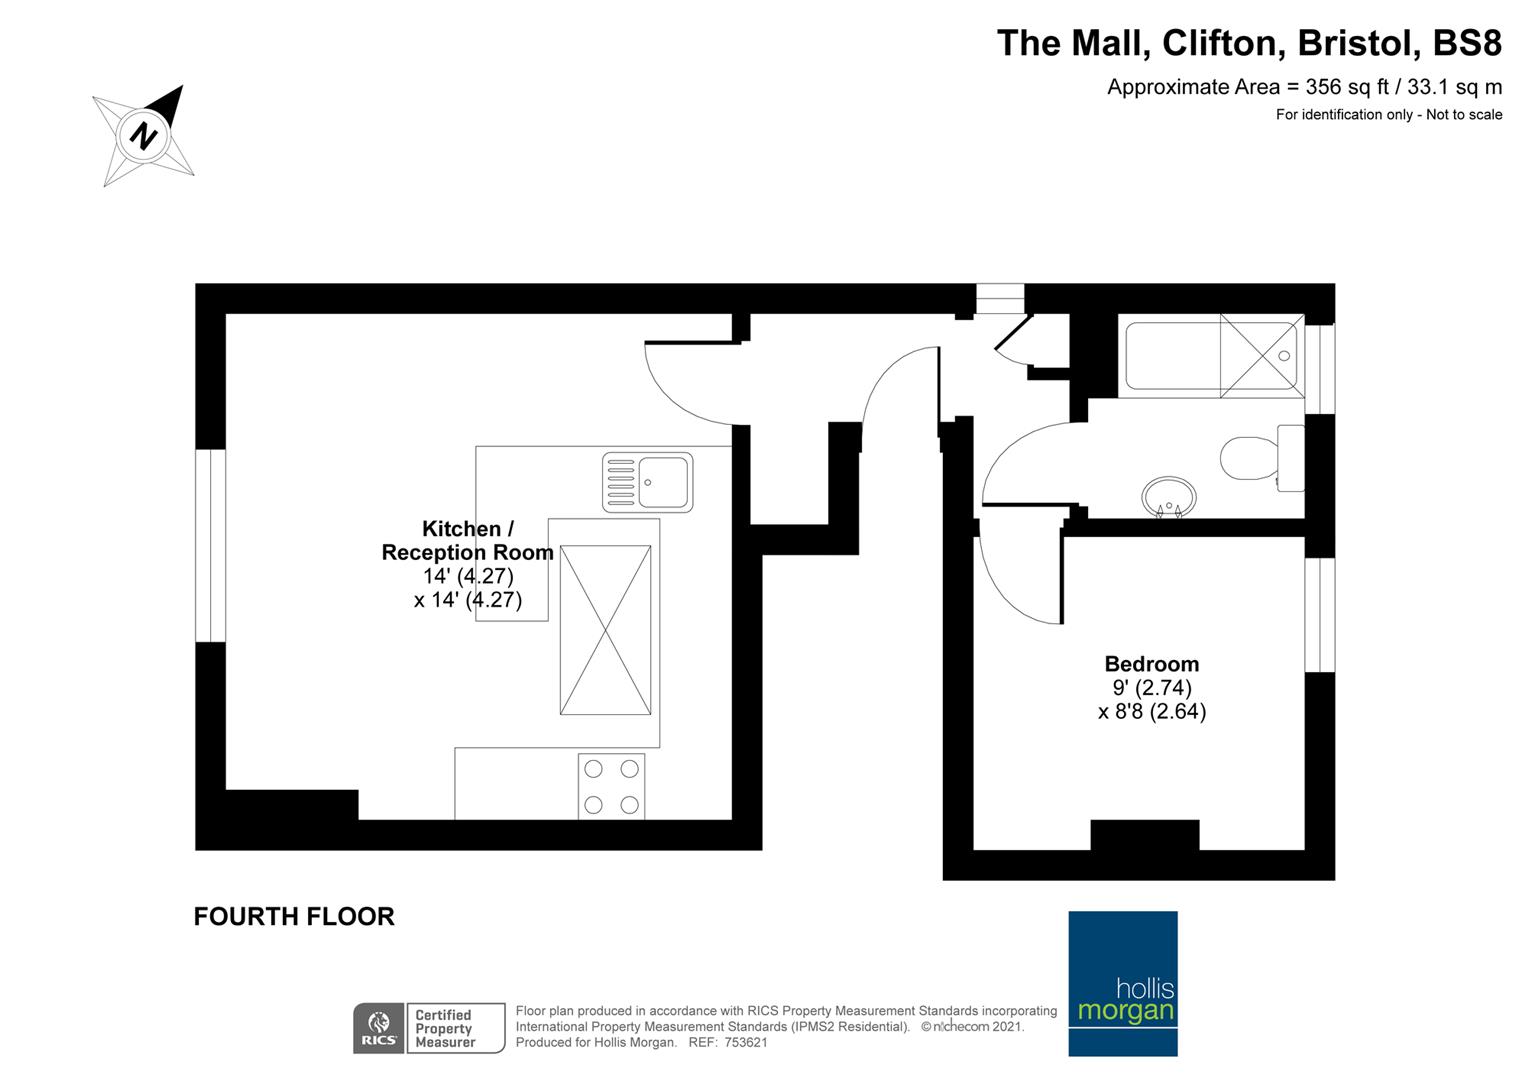 Floorplans For The Mall, Clifton